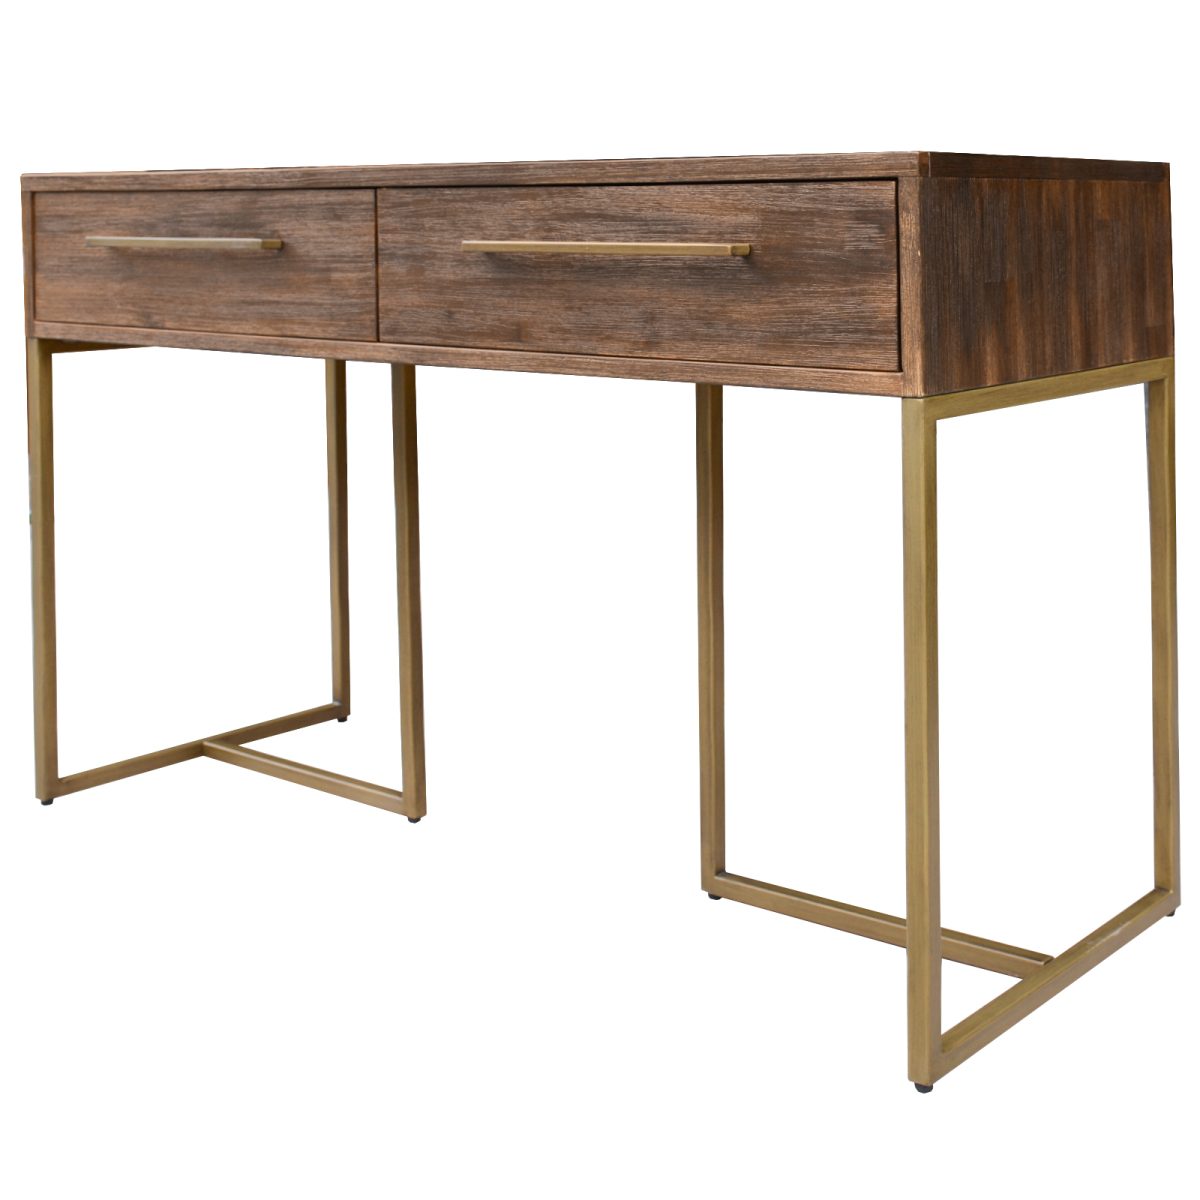 Tuberose Console Hallway Entry Table 120cm Solid Acacia Timber Wood – Brown